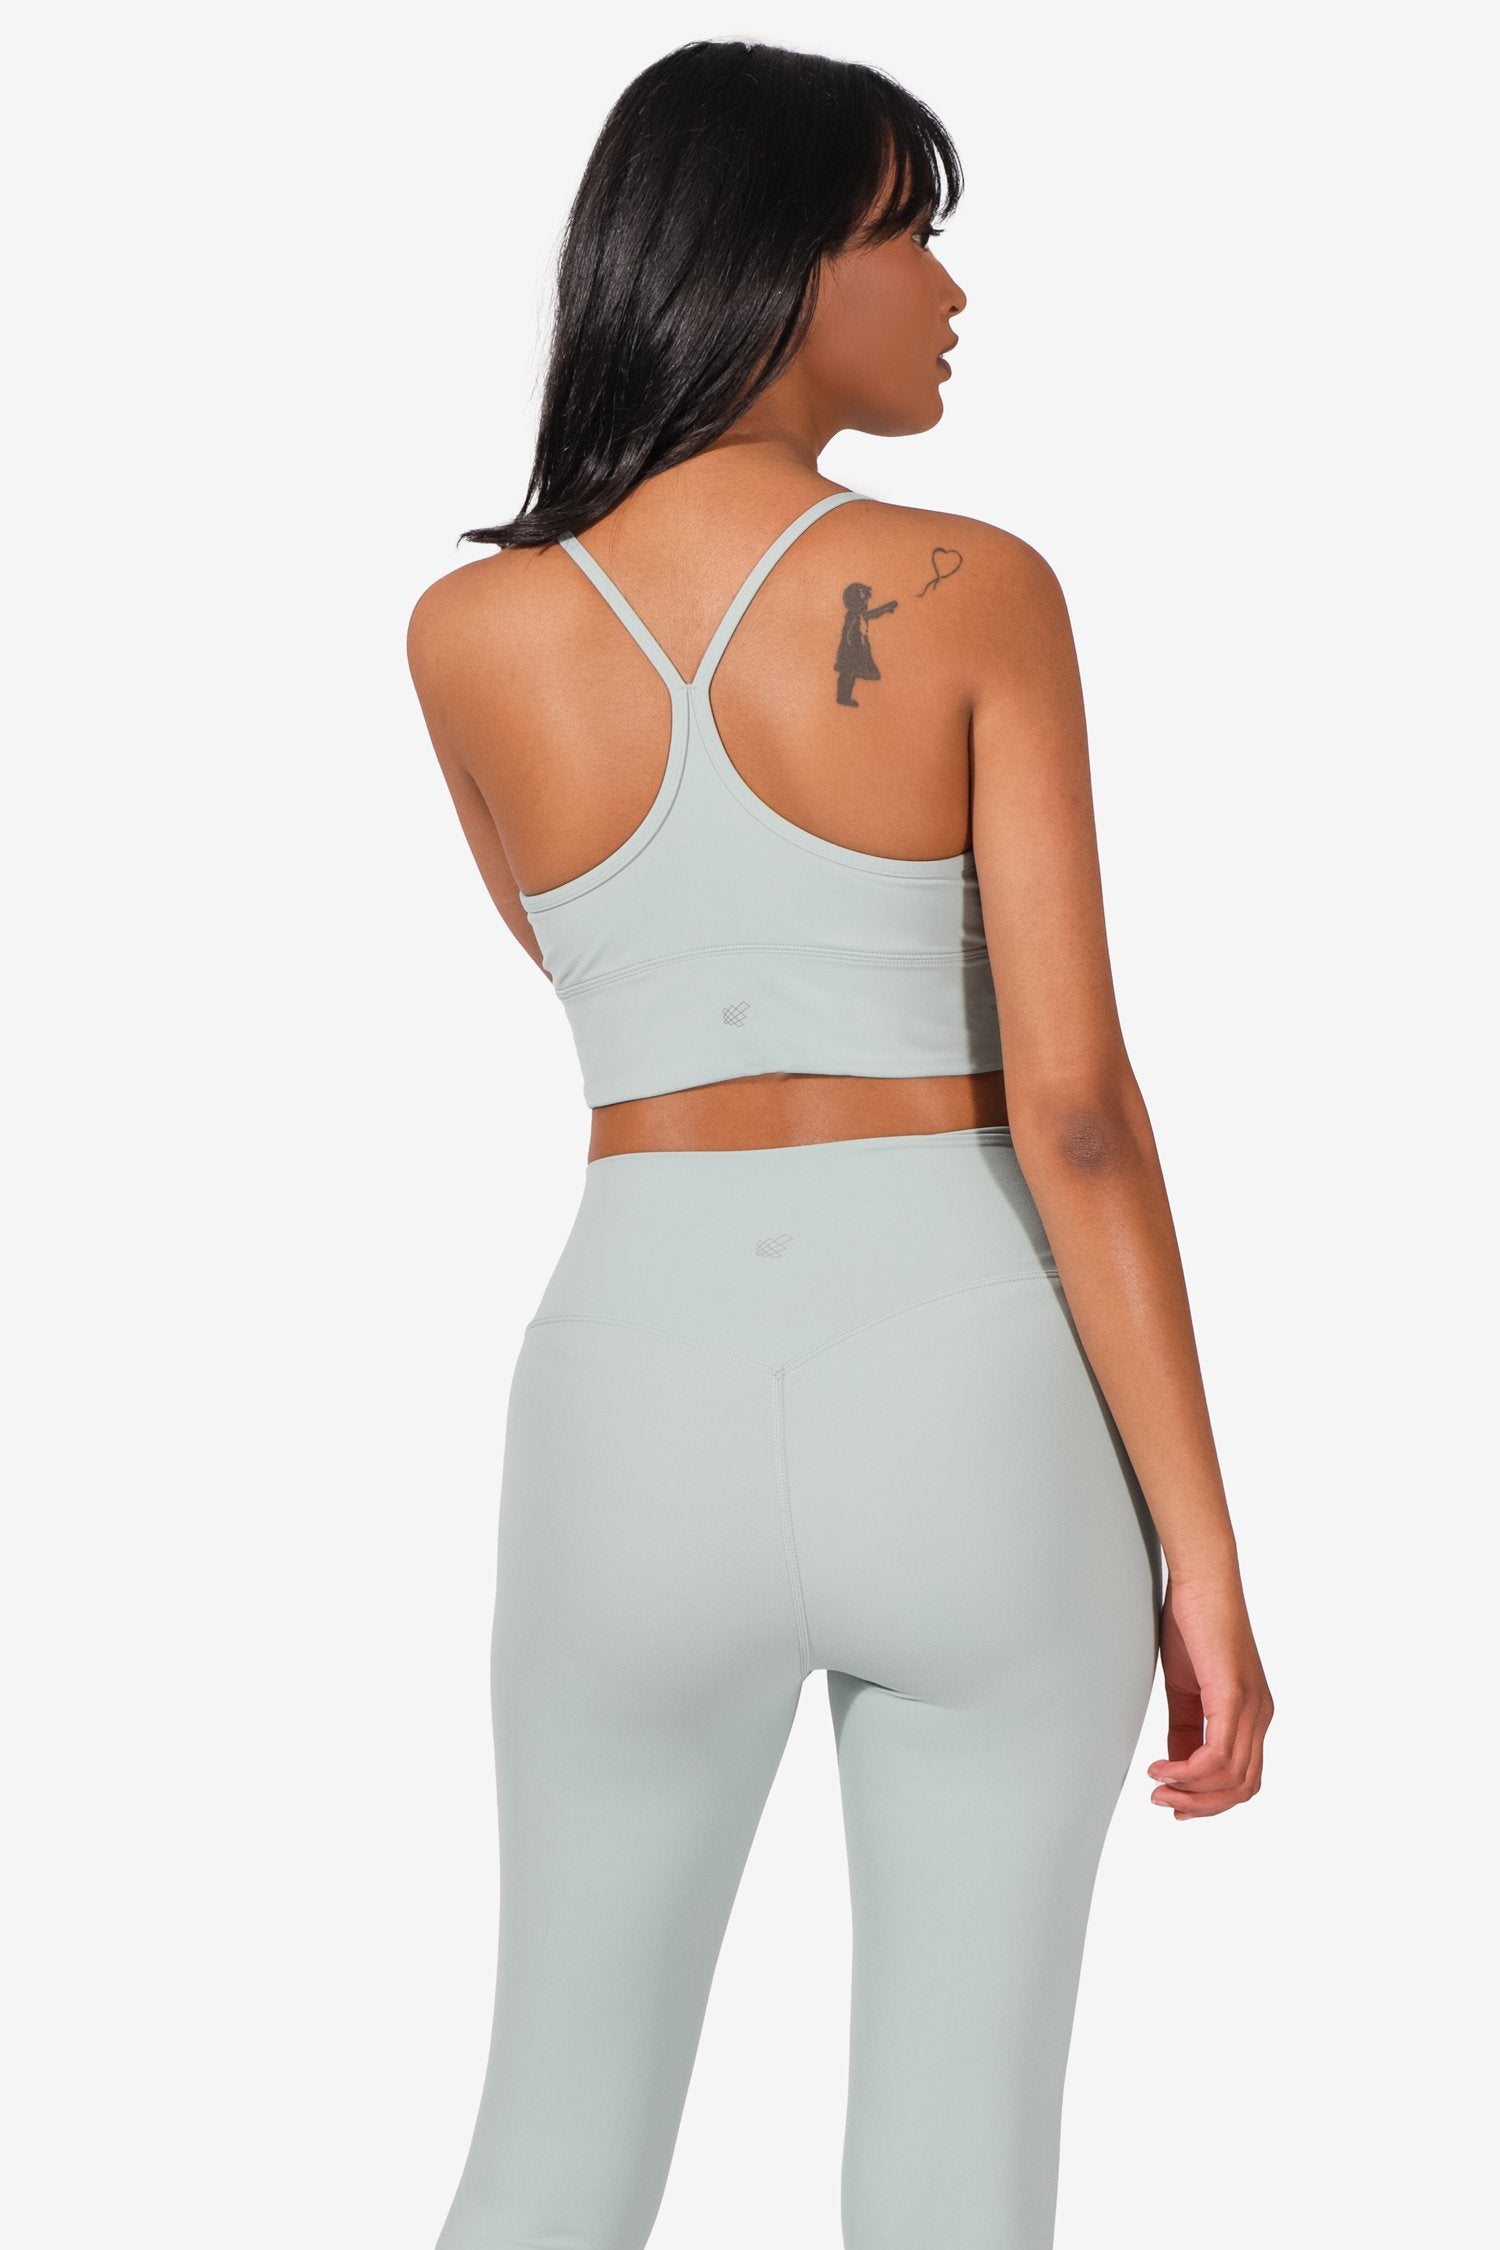 I was able to score the wild mint high neck align tank on markdown